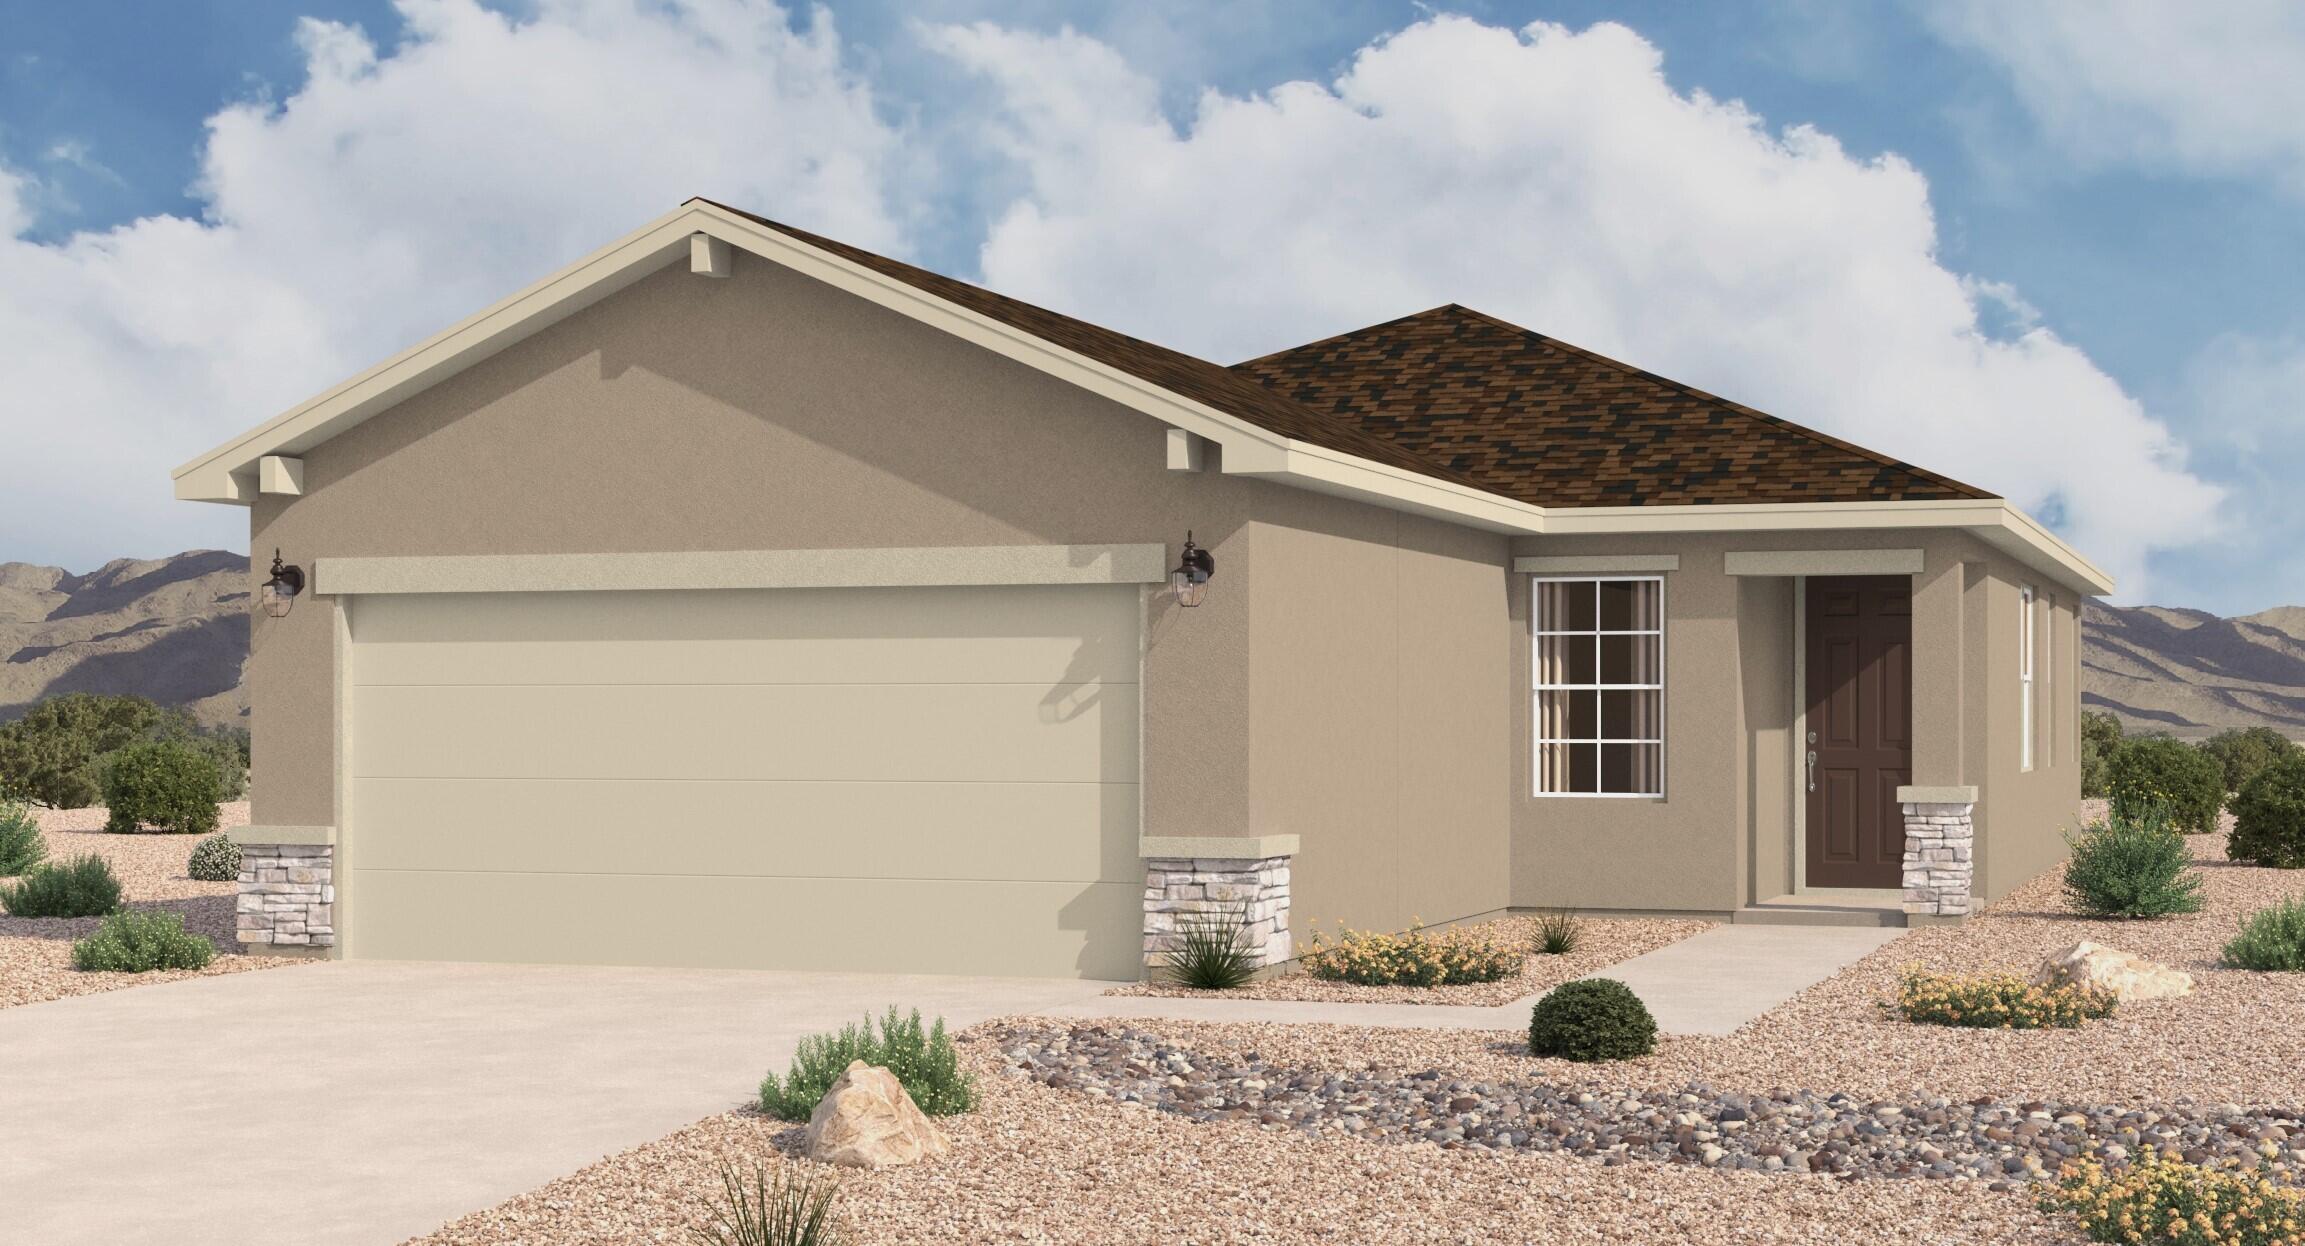 This home design features 3 bedrooms, 2 bathrooms, 2 car garage with a welcoming entry that opens to a bright, elegant dining room. The kitchen-dining-great room configuration is ideal for family living or festive gathering. Home is still under construction.